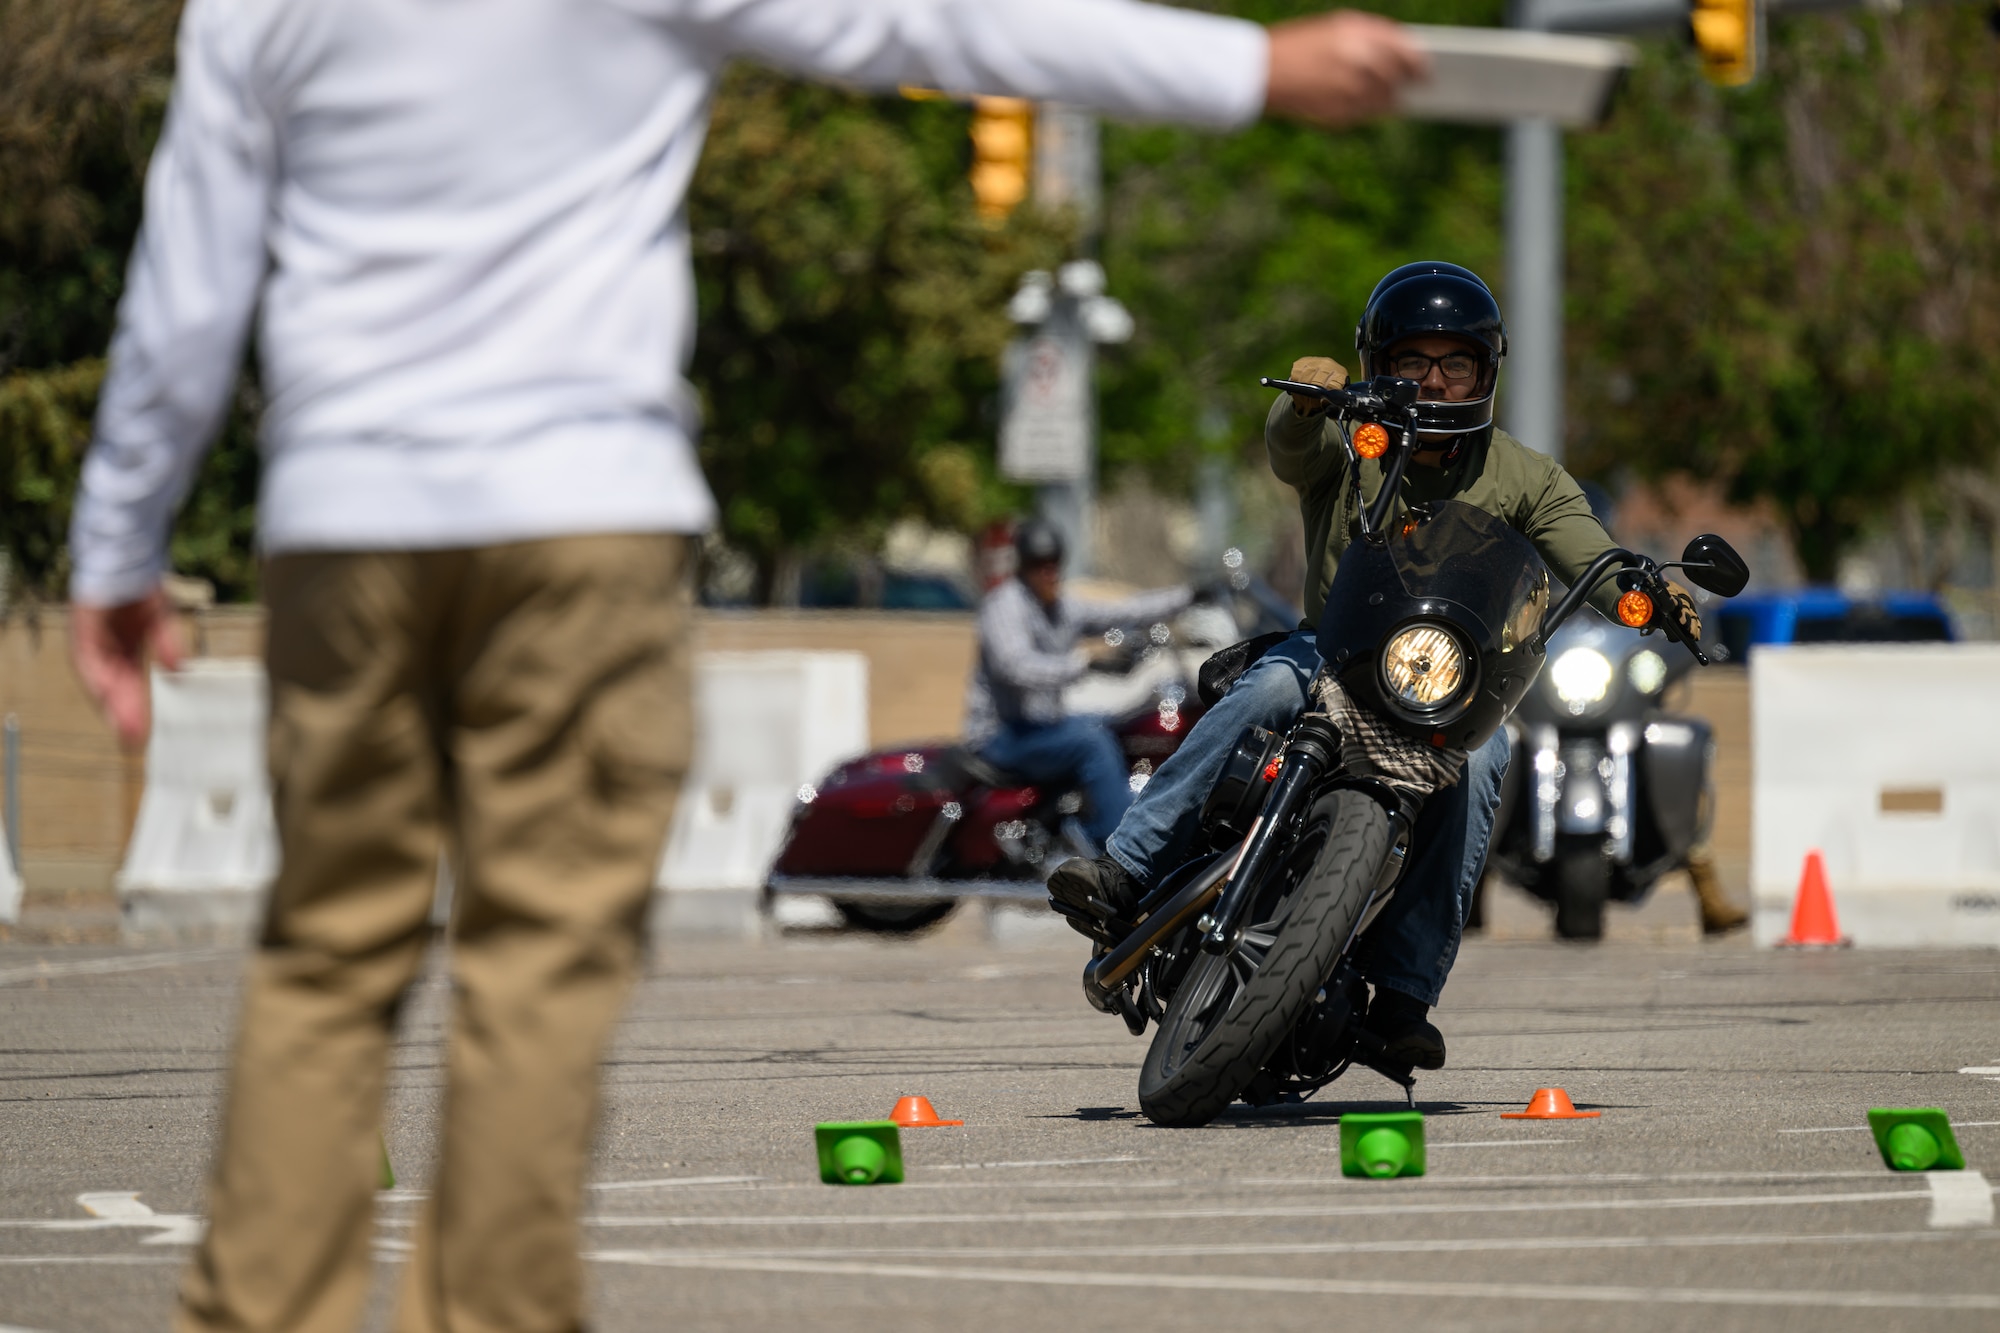 Julian Leija swerves an obstacle during a Basic Rider Course at Hill Air Force Base, Utah, May 26, 2023. The 75th Air Base Wing safety office maintains a SharePoint that provides motorcyclists with information and resources regarding safety, requirements and training for anyone with base access.  (U.S. Air Force photo by R. Nial Bradshaw)